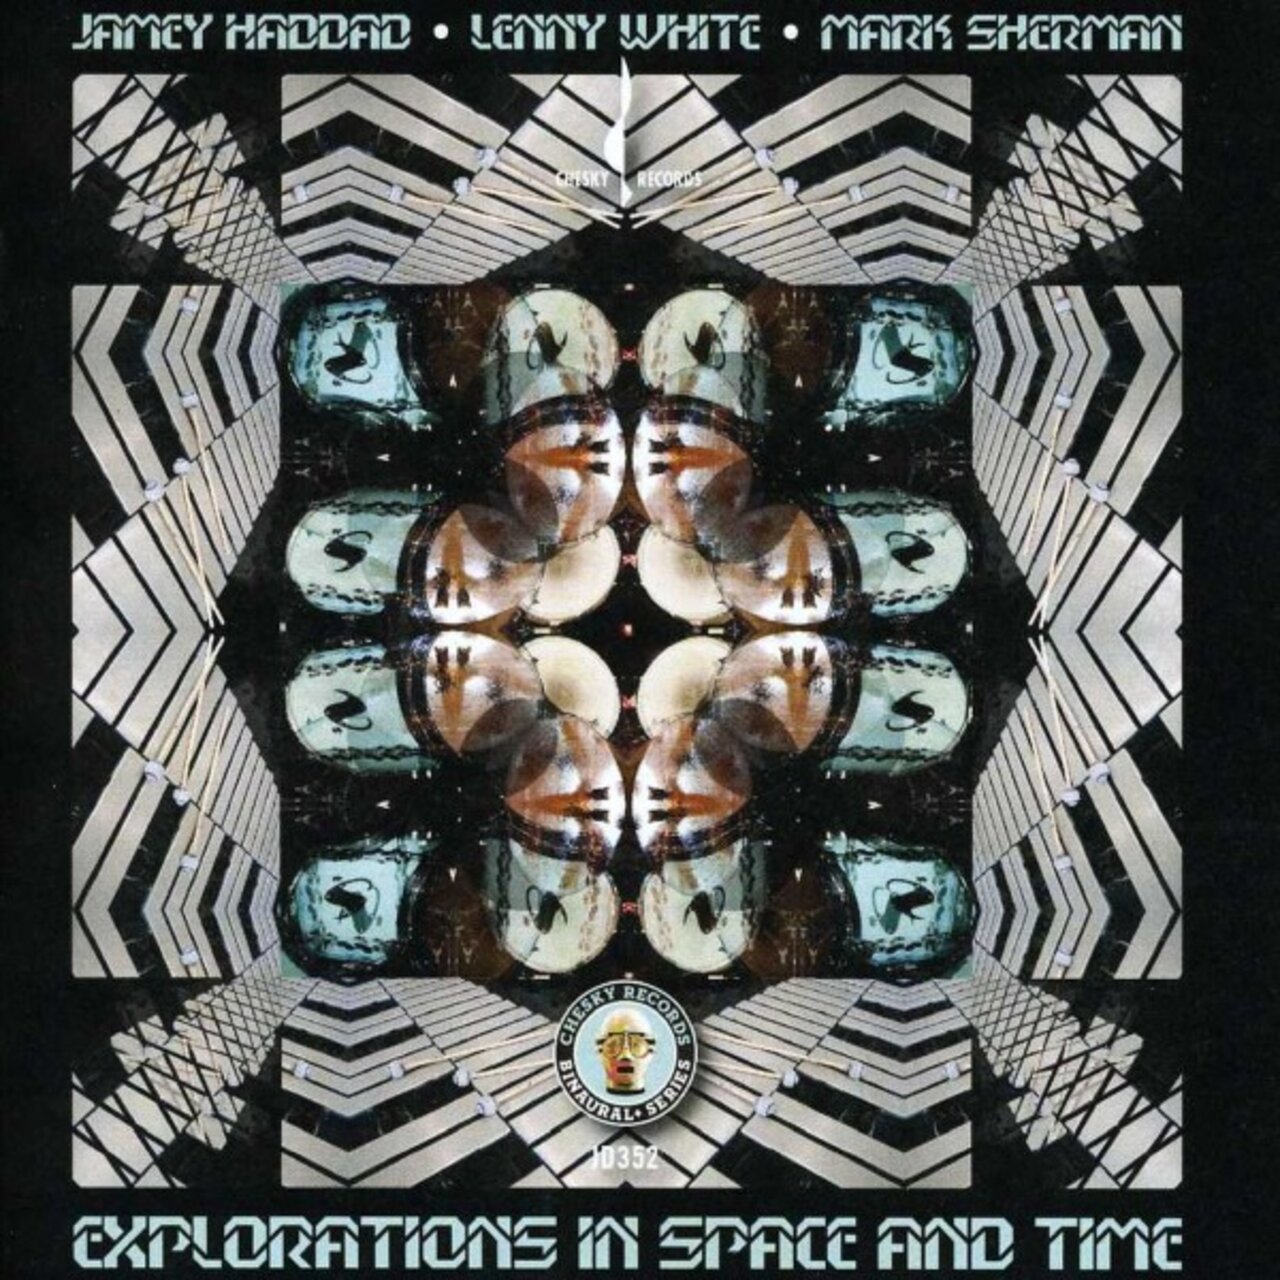 Jamey Haddad, Lenny White, Mark Sherman - Explorations in Space and Time [2013]